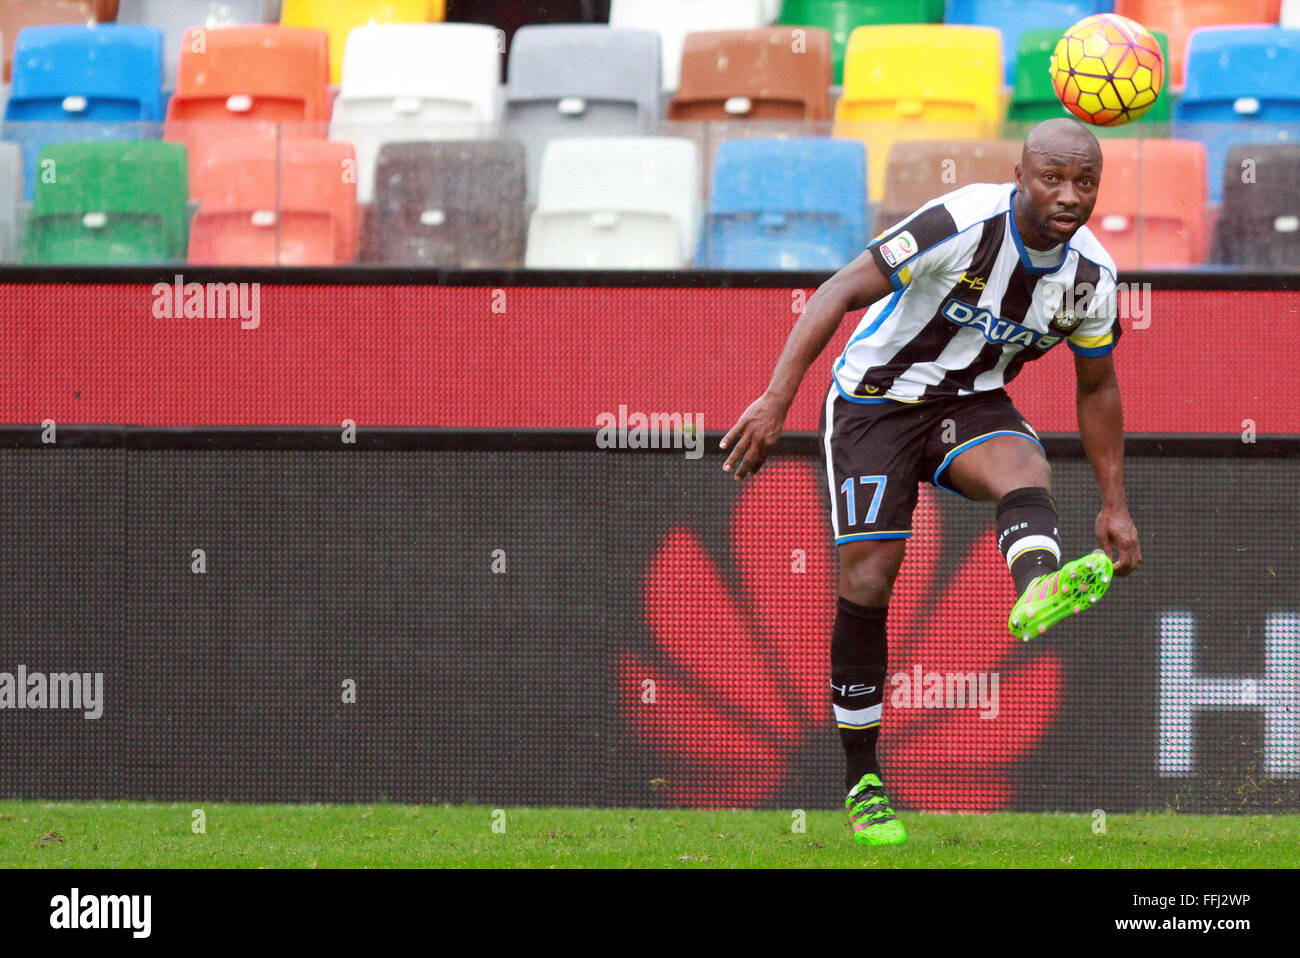 Udine, Italy. 14th Feb, 2016. Udinese's midfielder Pablo Armero kicks the ball during the Italian Serie A football match between Udinese Calcio v Bologna FC. Bologna beats Udinese 0-1 in Italian Serie A football match. © Andrea Spinelli/Pacific Press/Alamy Live News Stock Photo